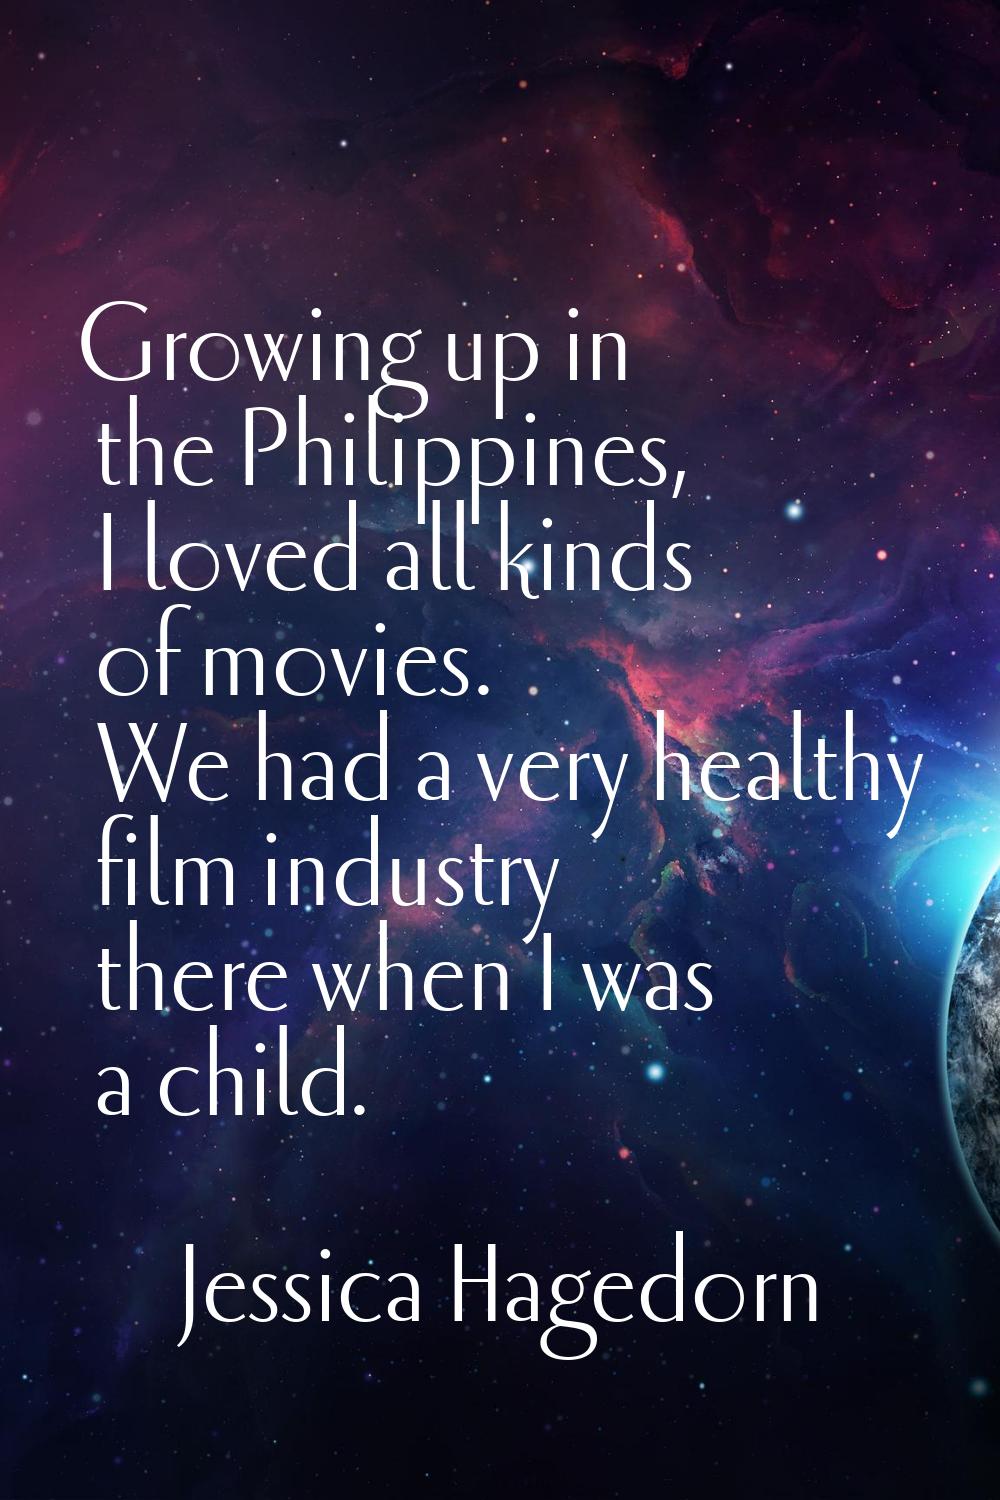 Growing up in the Philippines, I loved all kinds of movies. We had a very healthy film industry the